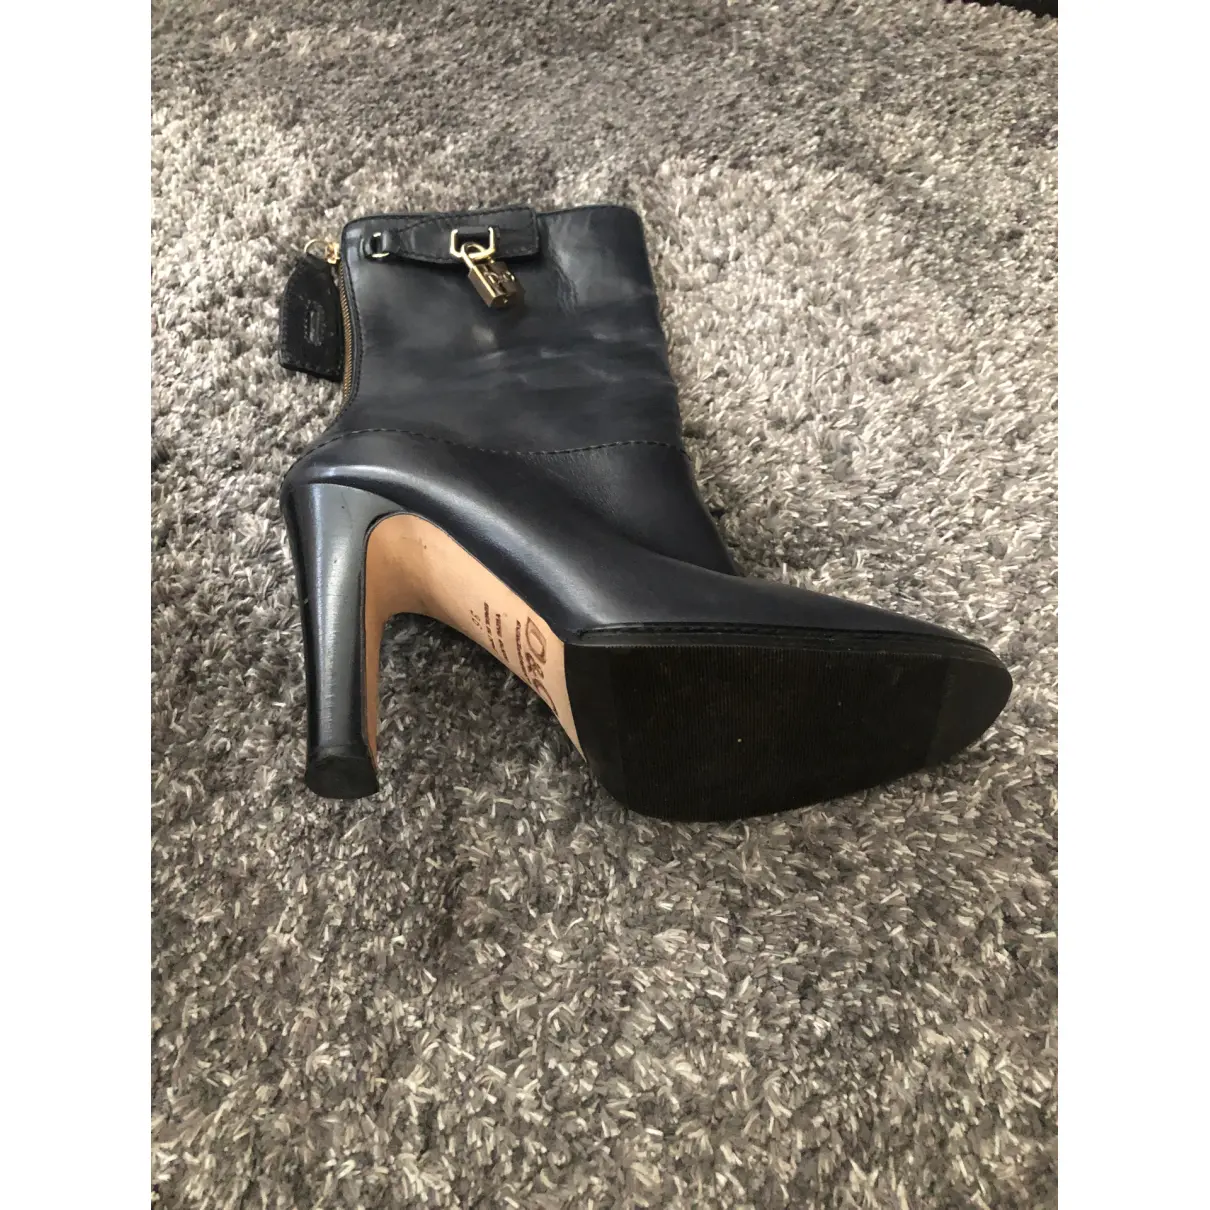 Buy D&G Leather ankle boots online